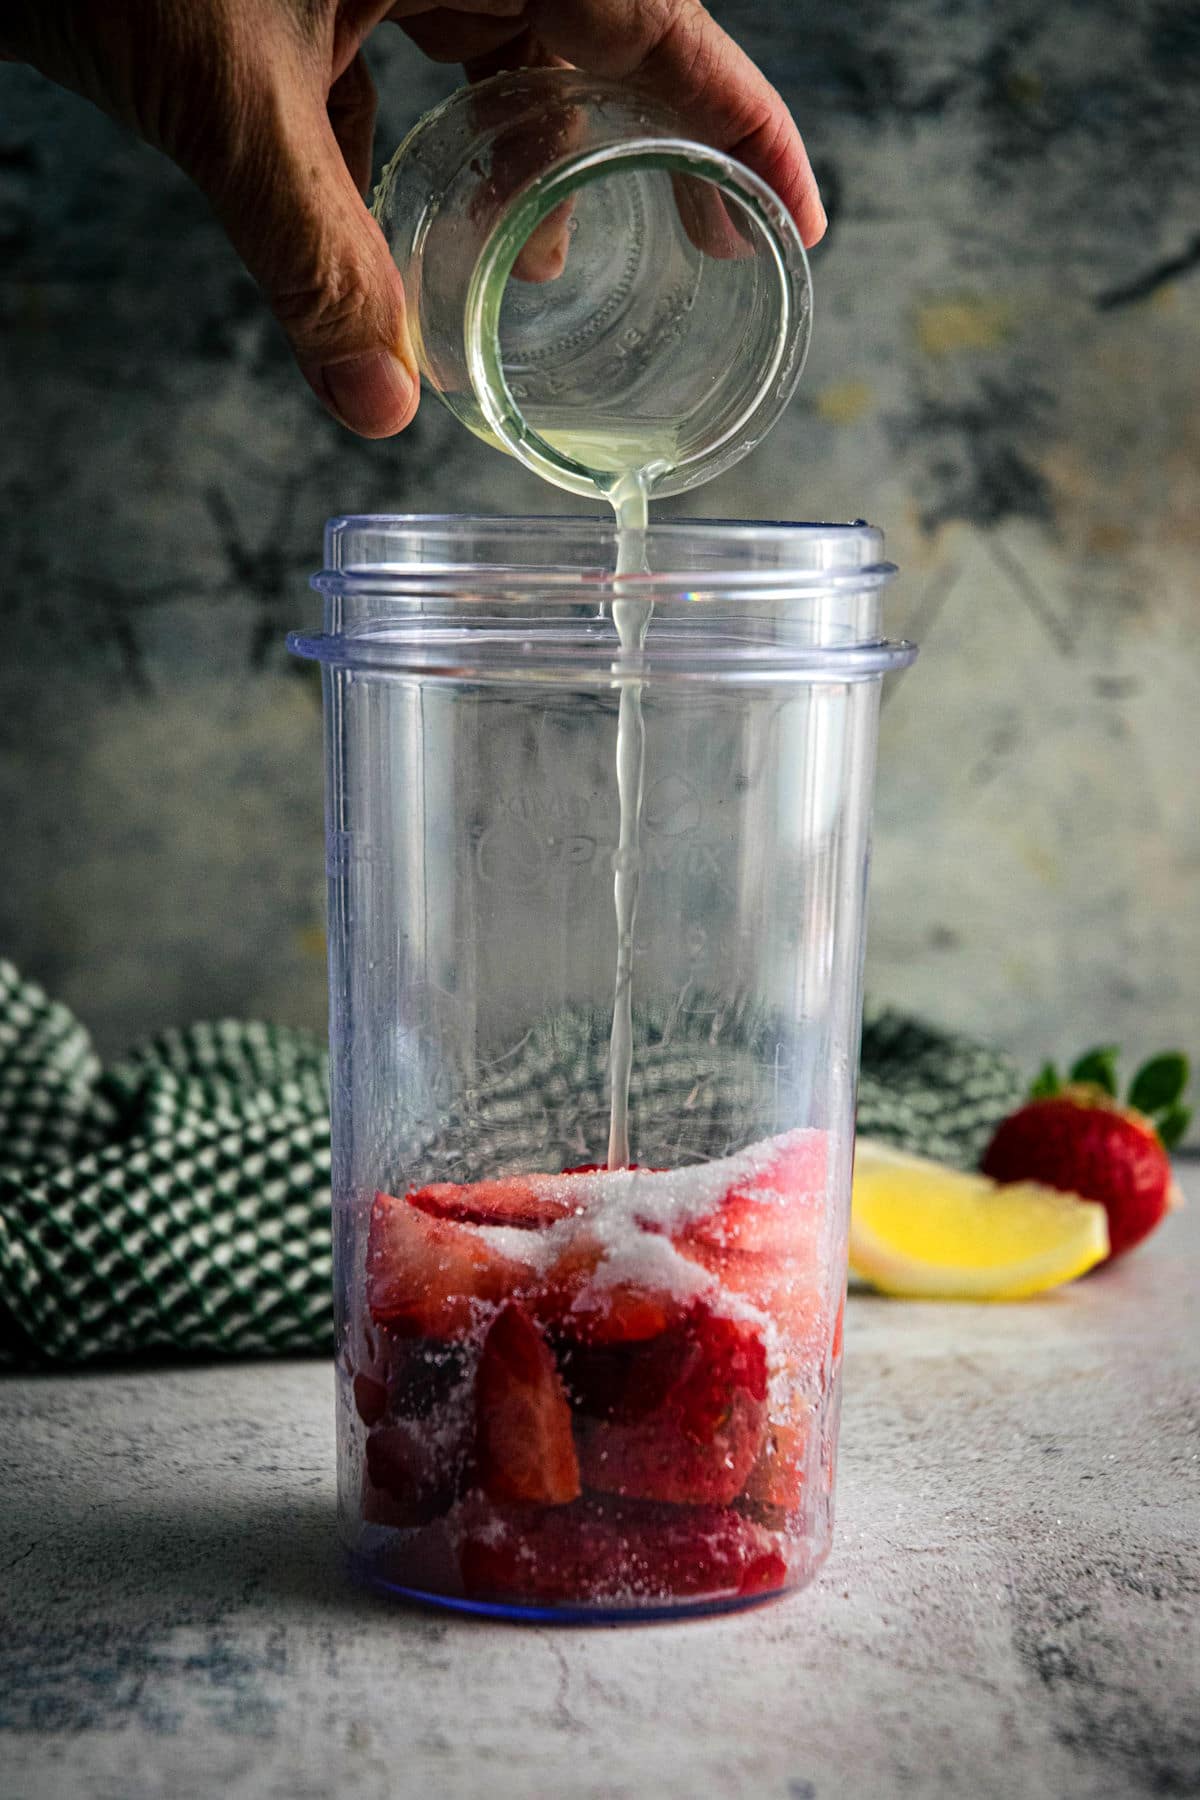 Strawberries and sugar in a blender jar. Lemon juice pouring into the jar.